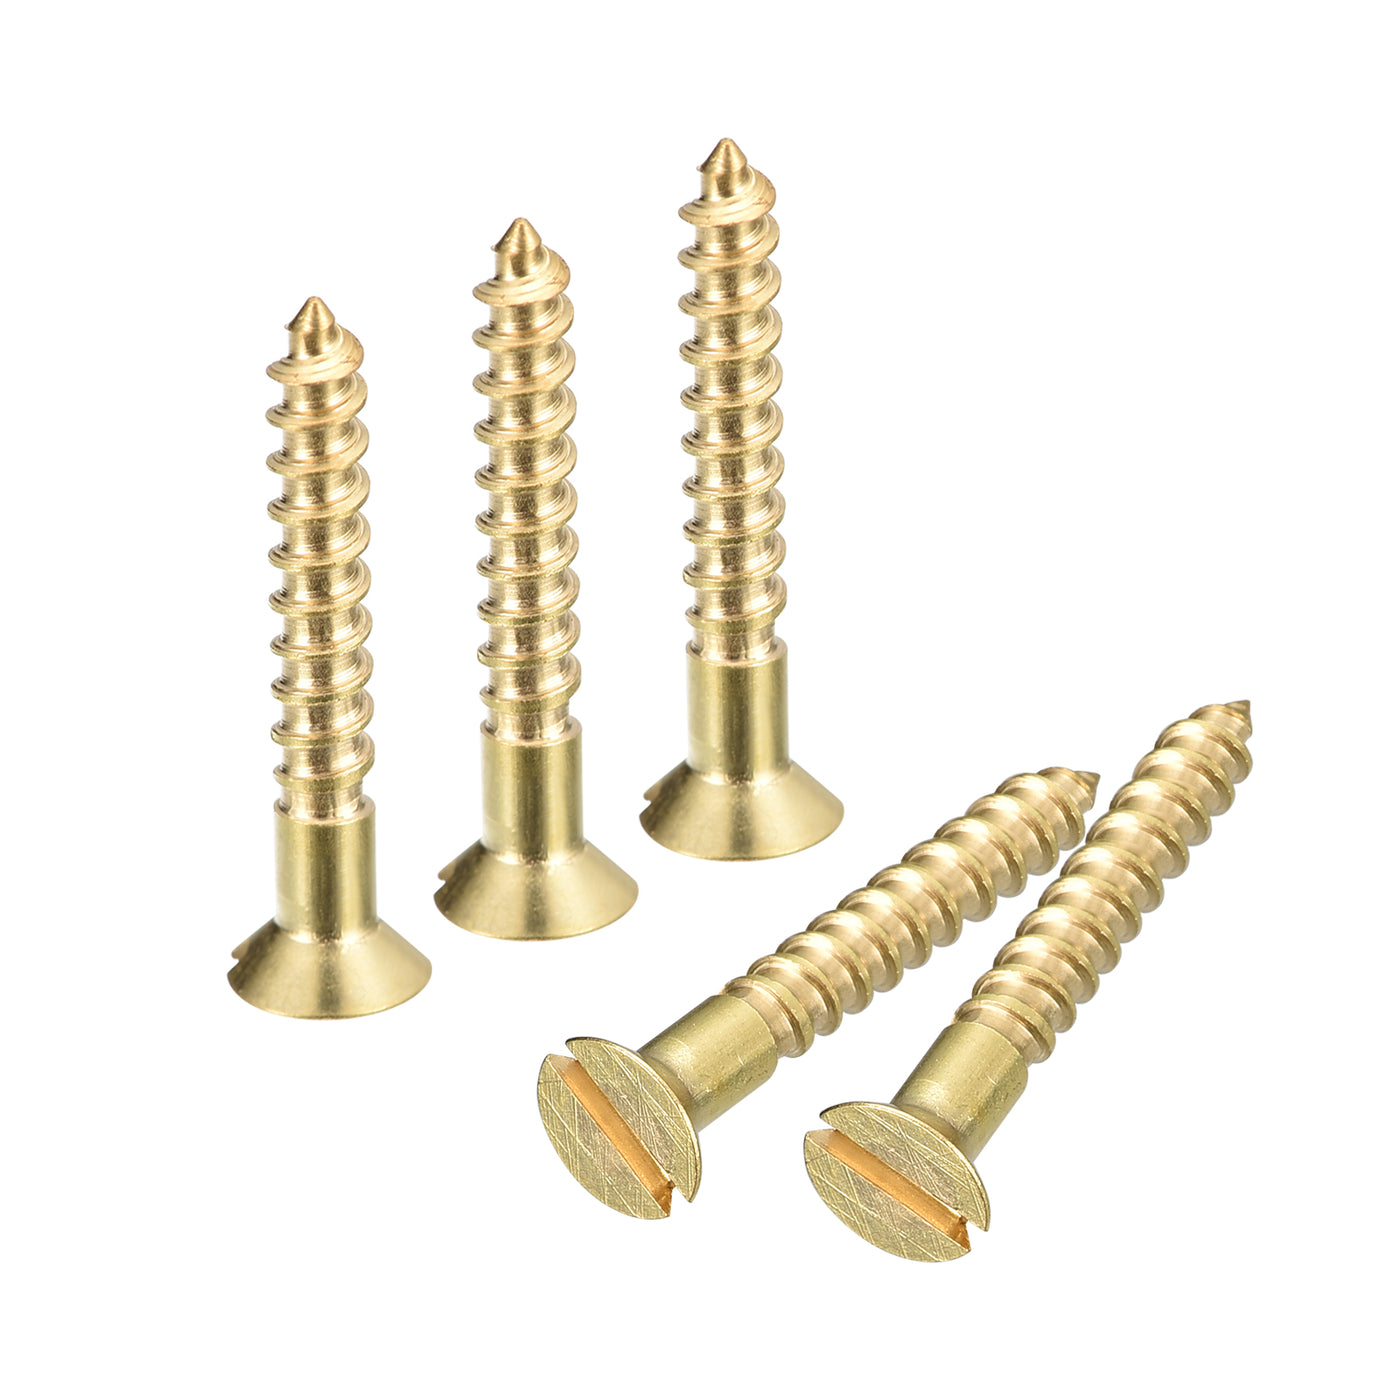 uxcell Uxcell 50Pcs M3 x 16mm Brass Slotted Drive Flat Head Wood Screws Self Tapping Screw